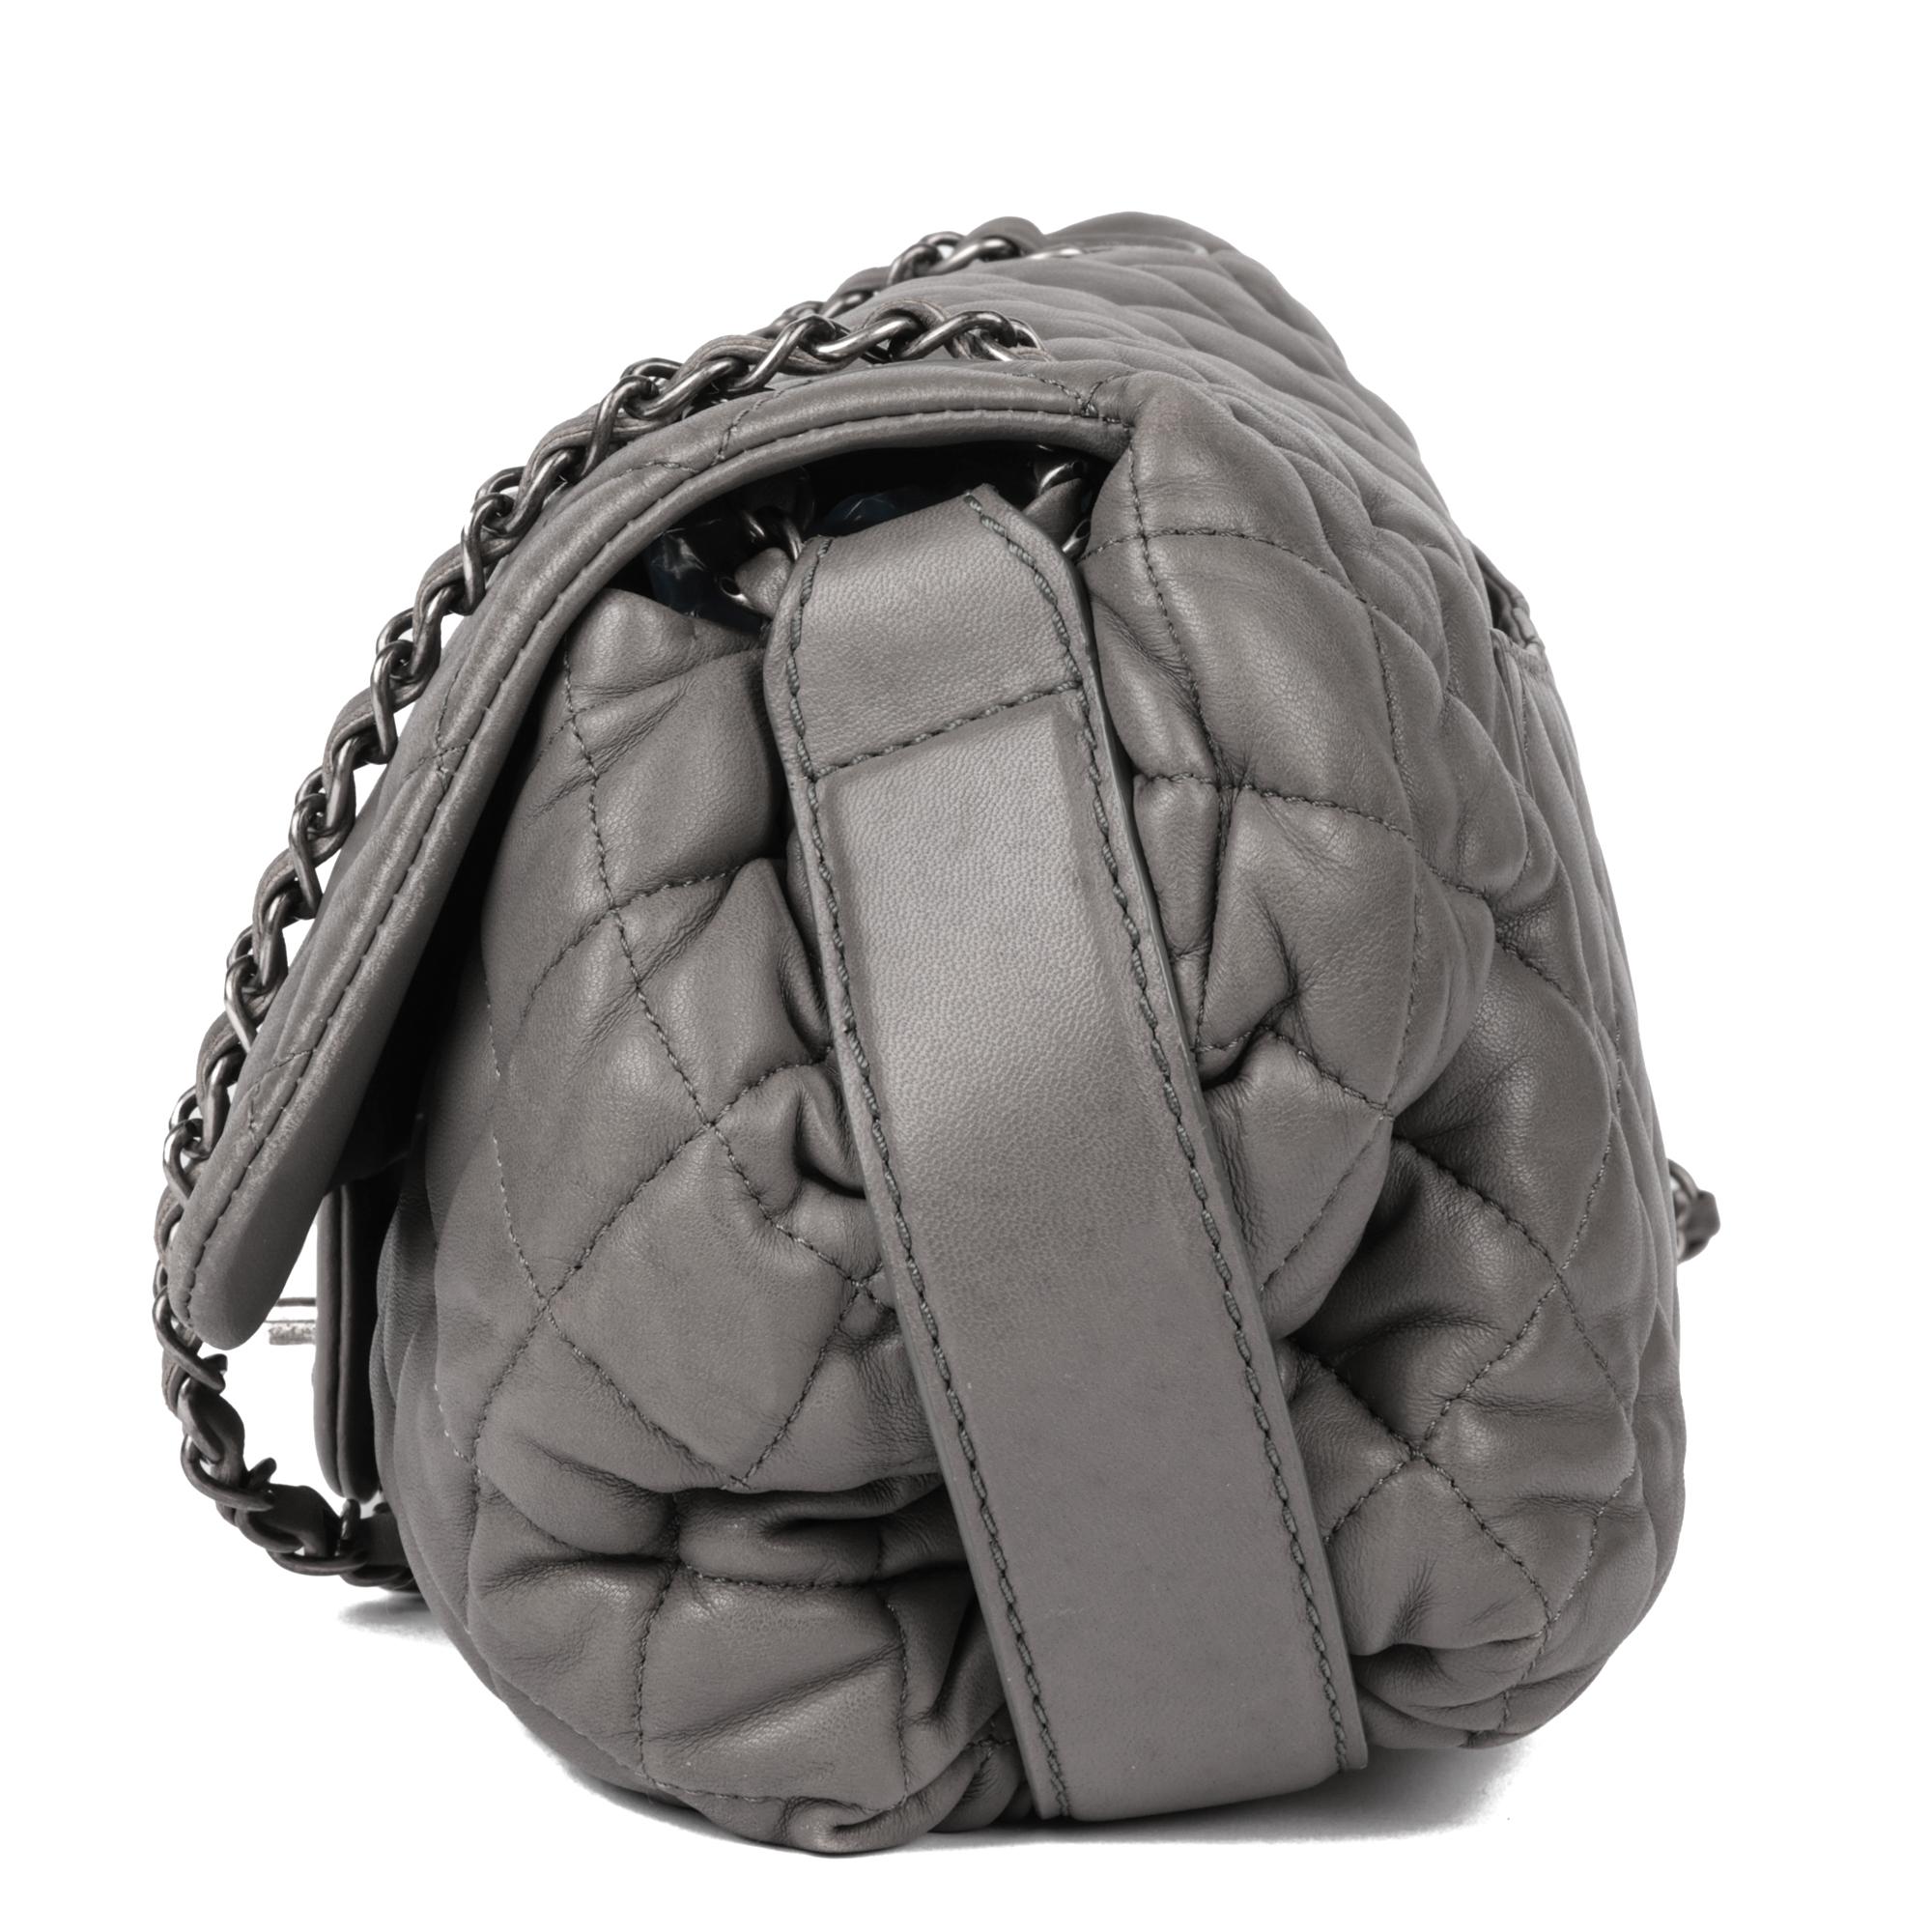 CHANEL Grey Quilted Lambskin Classic Single Flap Bag In Excellent Condition For Sale In Bishop's Stortford, Hertfordshire